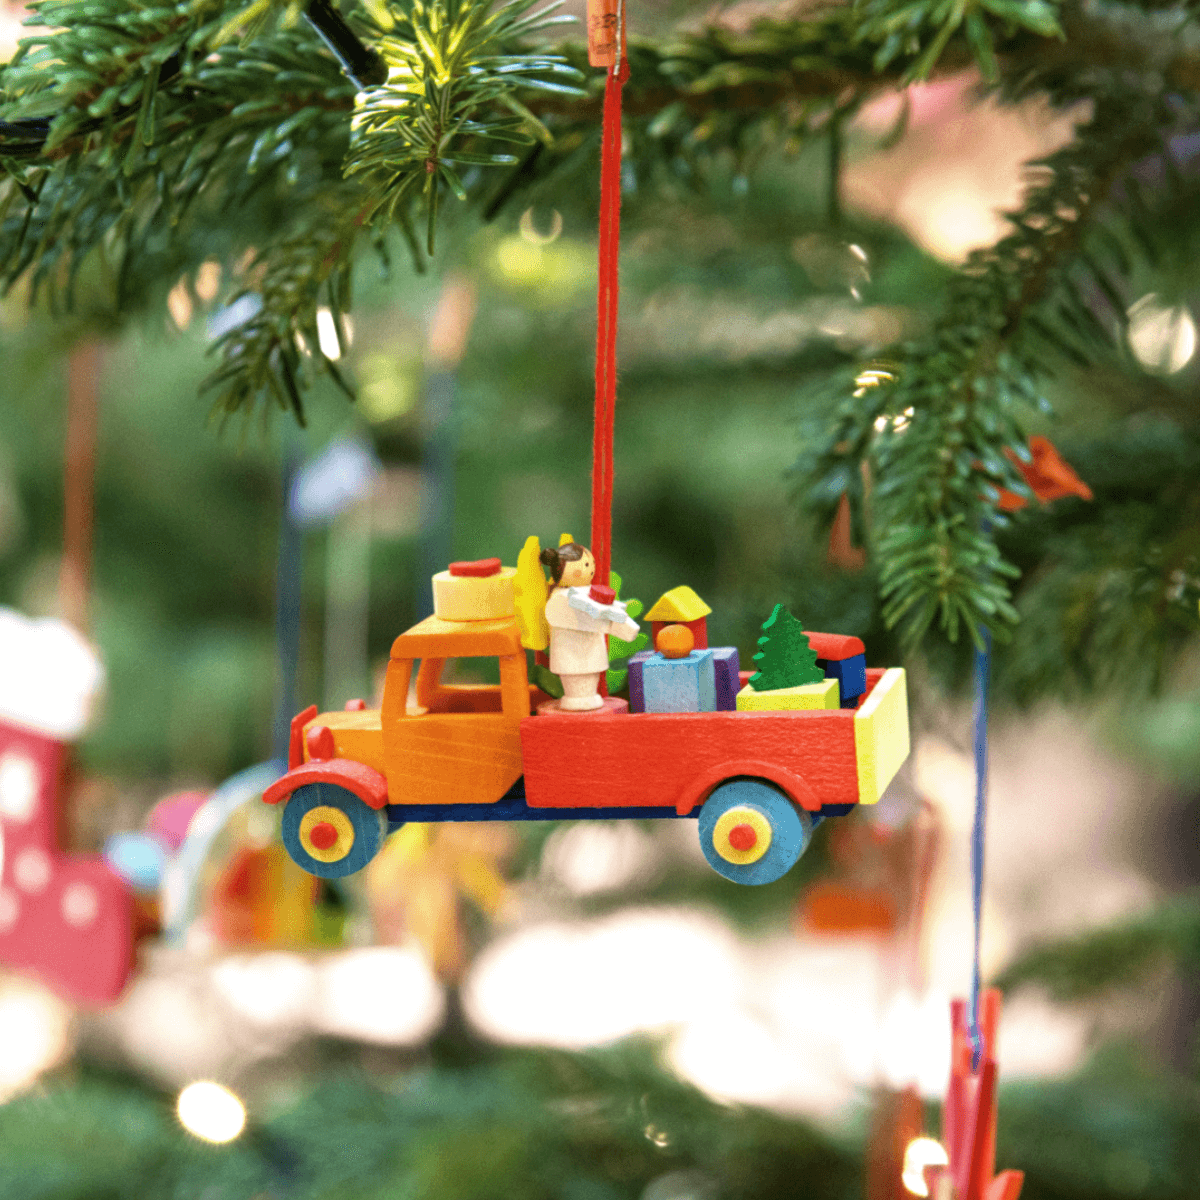 Truck Ornament with santa claus